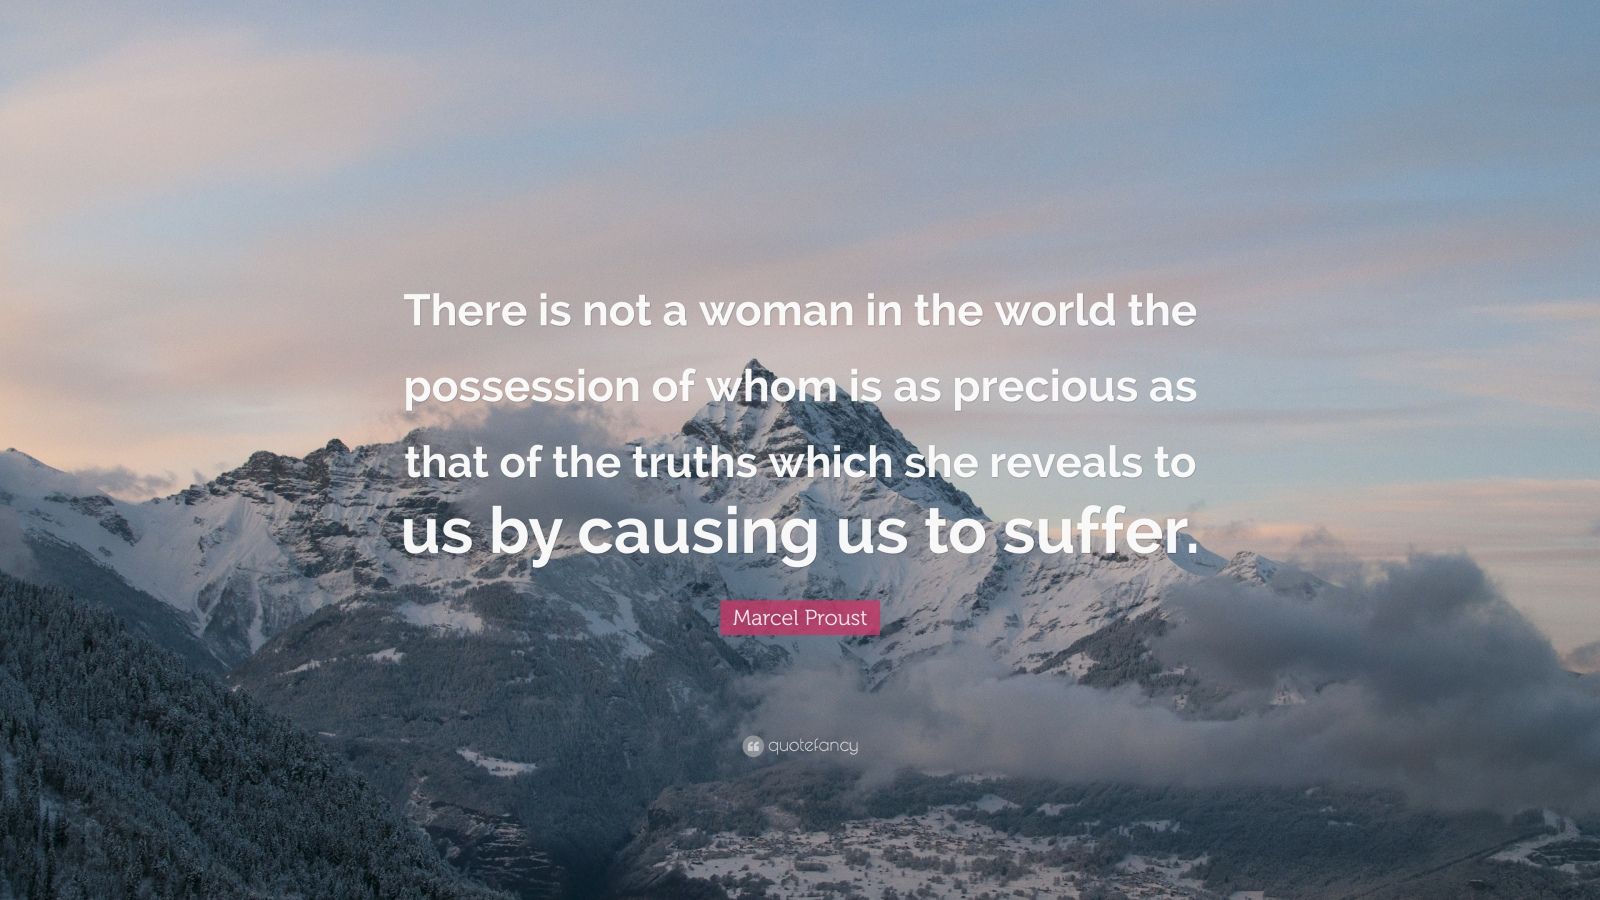 Marcel Proust Quote: “There is not a woman in the world the 